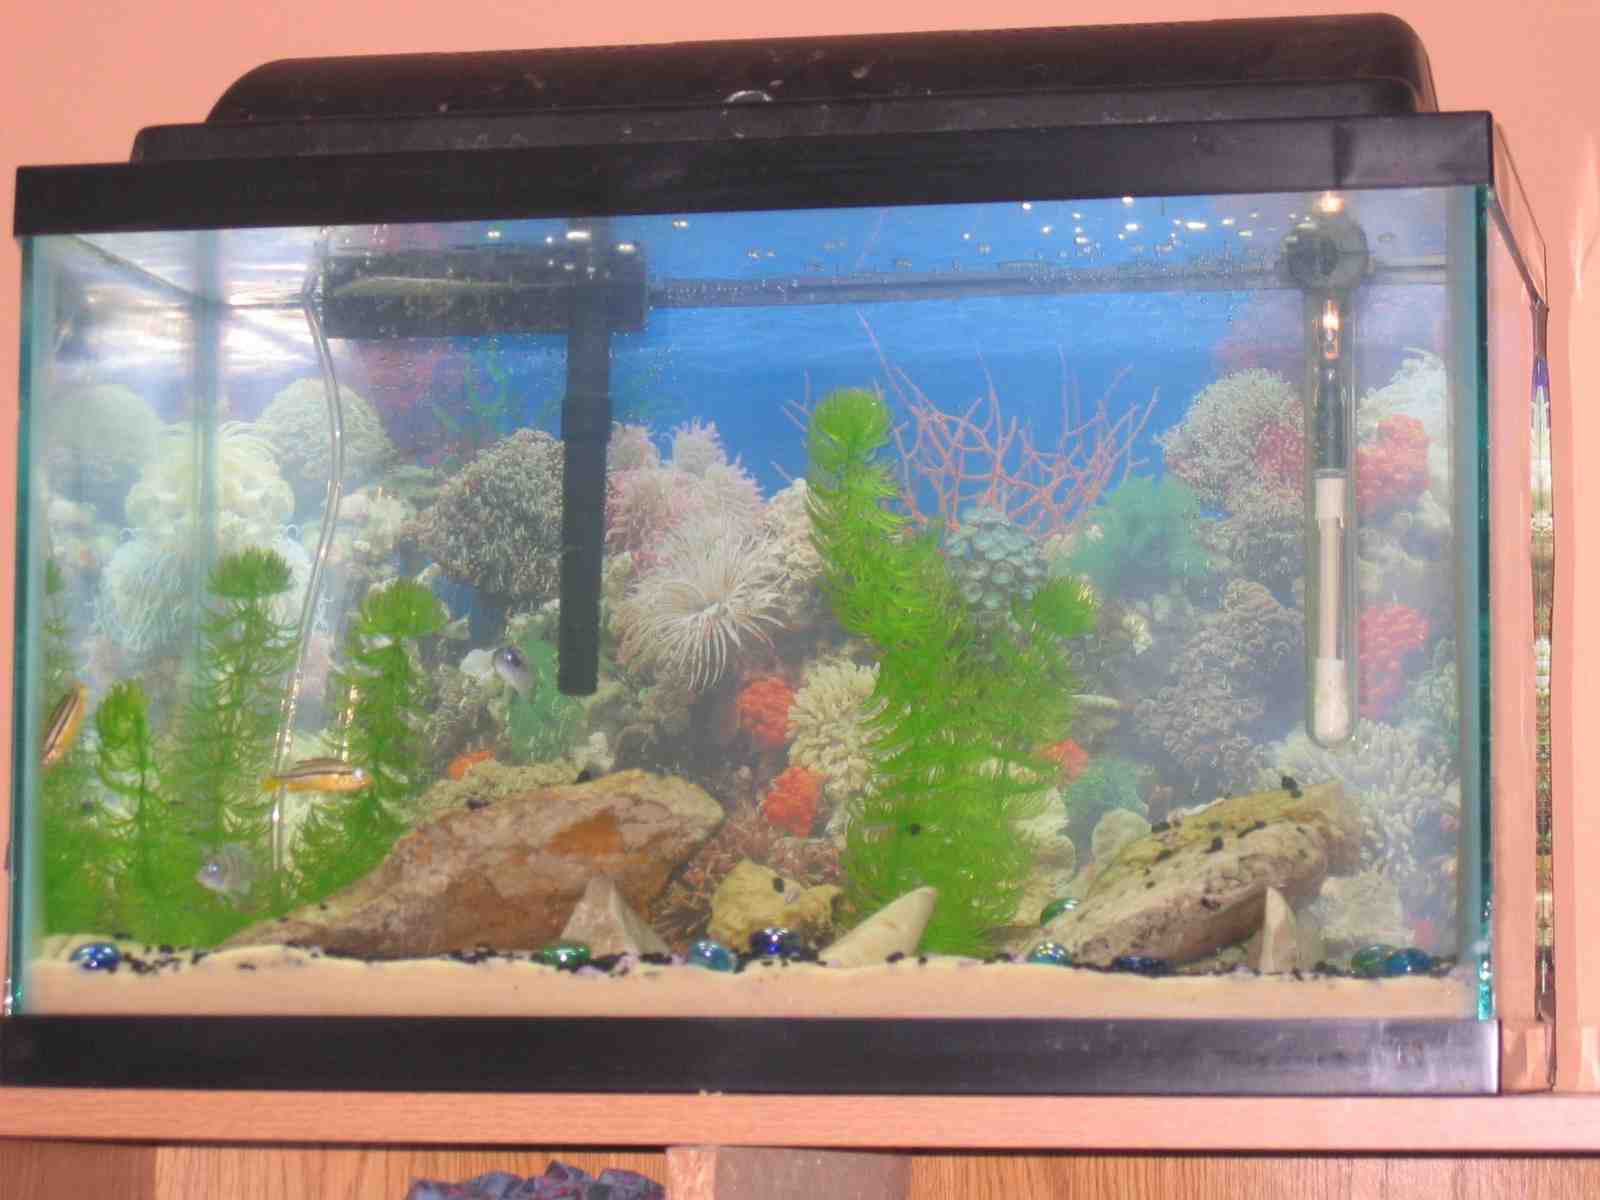 Just got this tank setup today (OCT 1, 2003)  It is a ten gallon tank.  It has a sand substrate and currently has six cichlids.  Three Auratus and thr